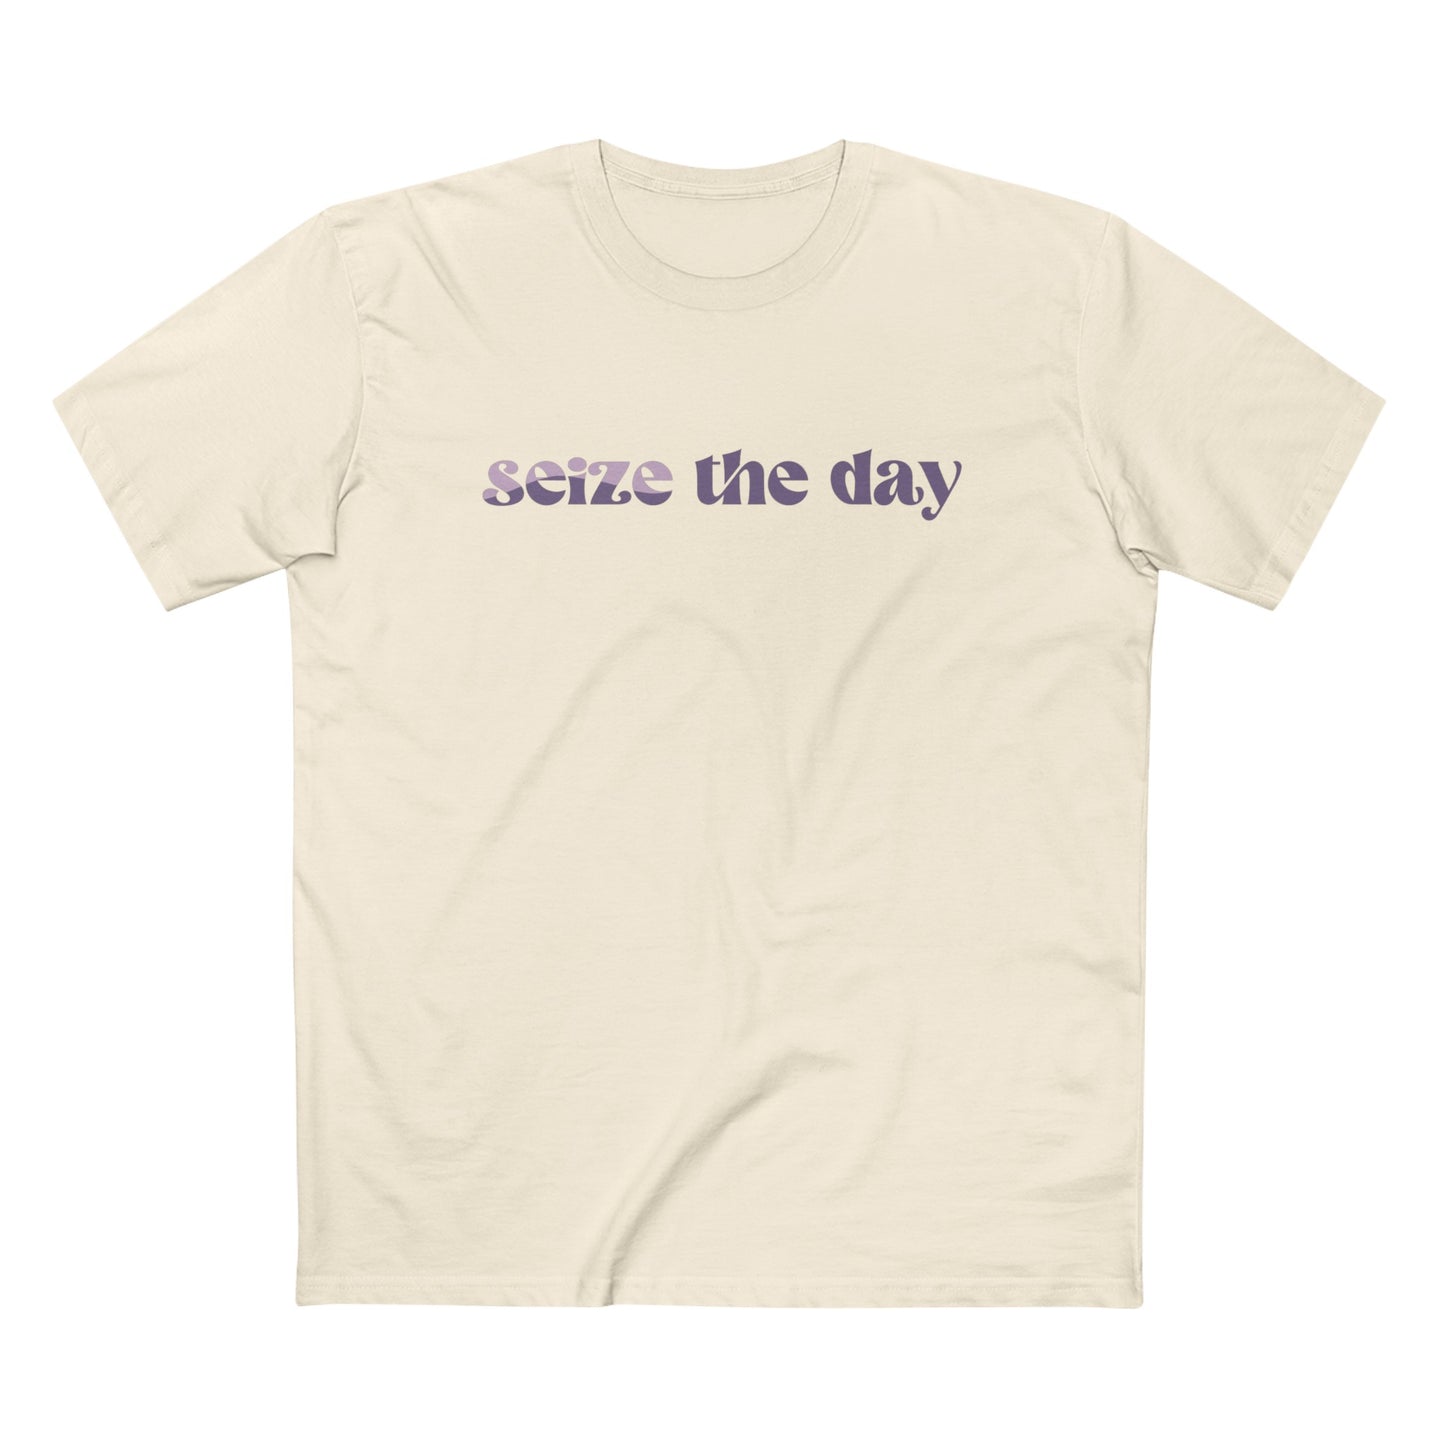 seize the day tee